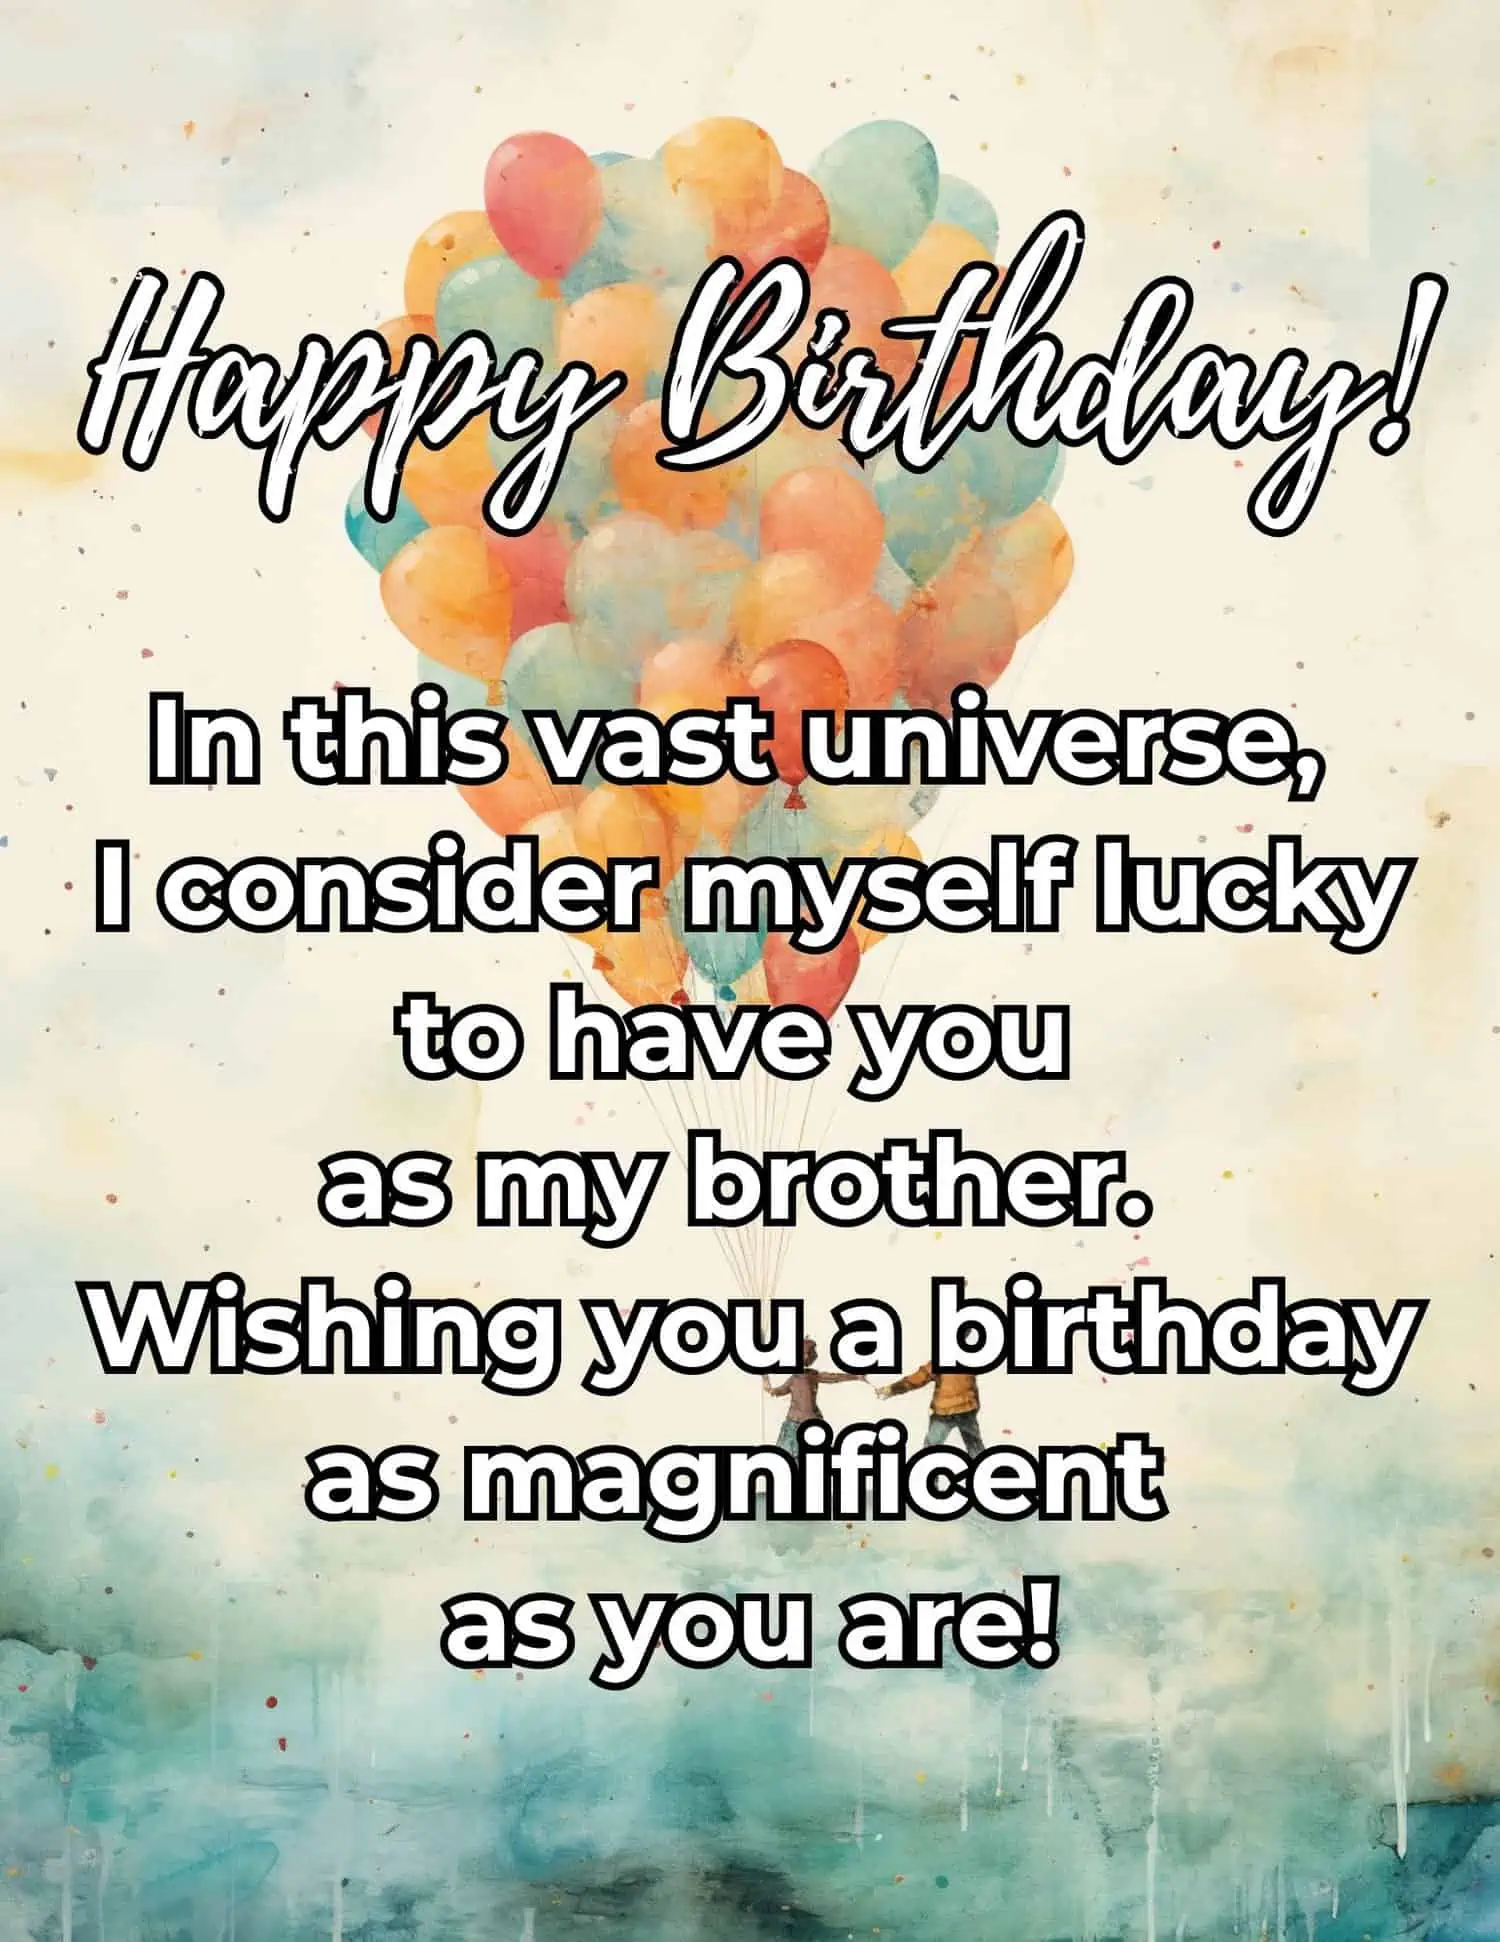 200+ Heart Touching Birthday Wishes For Your Brother